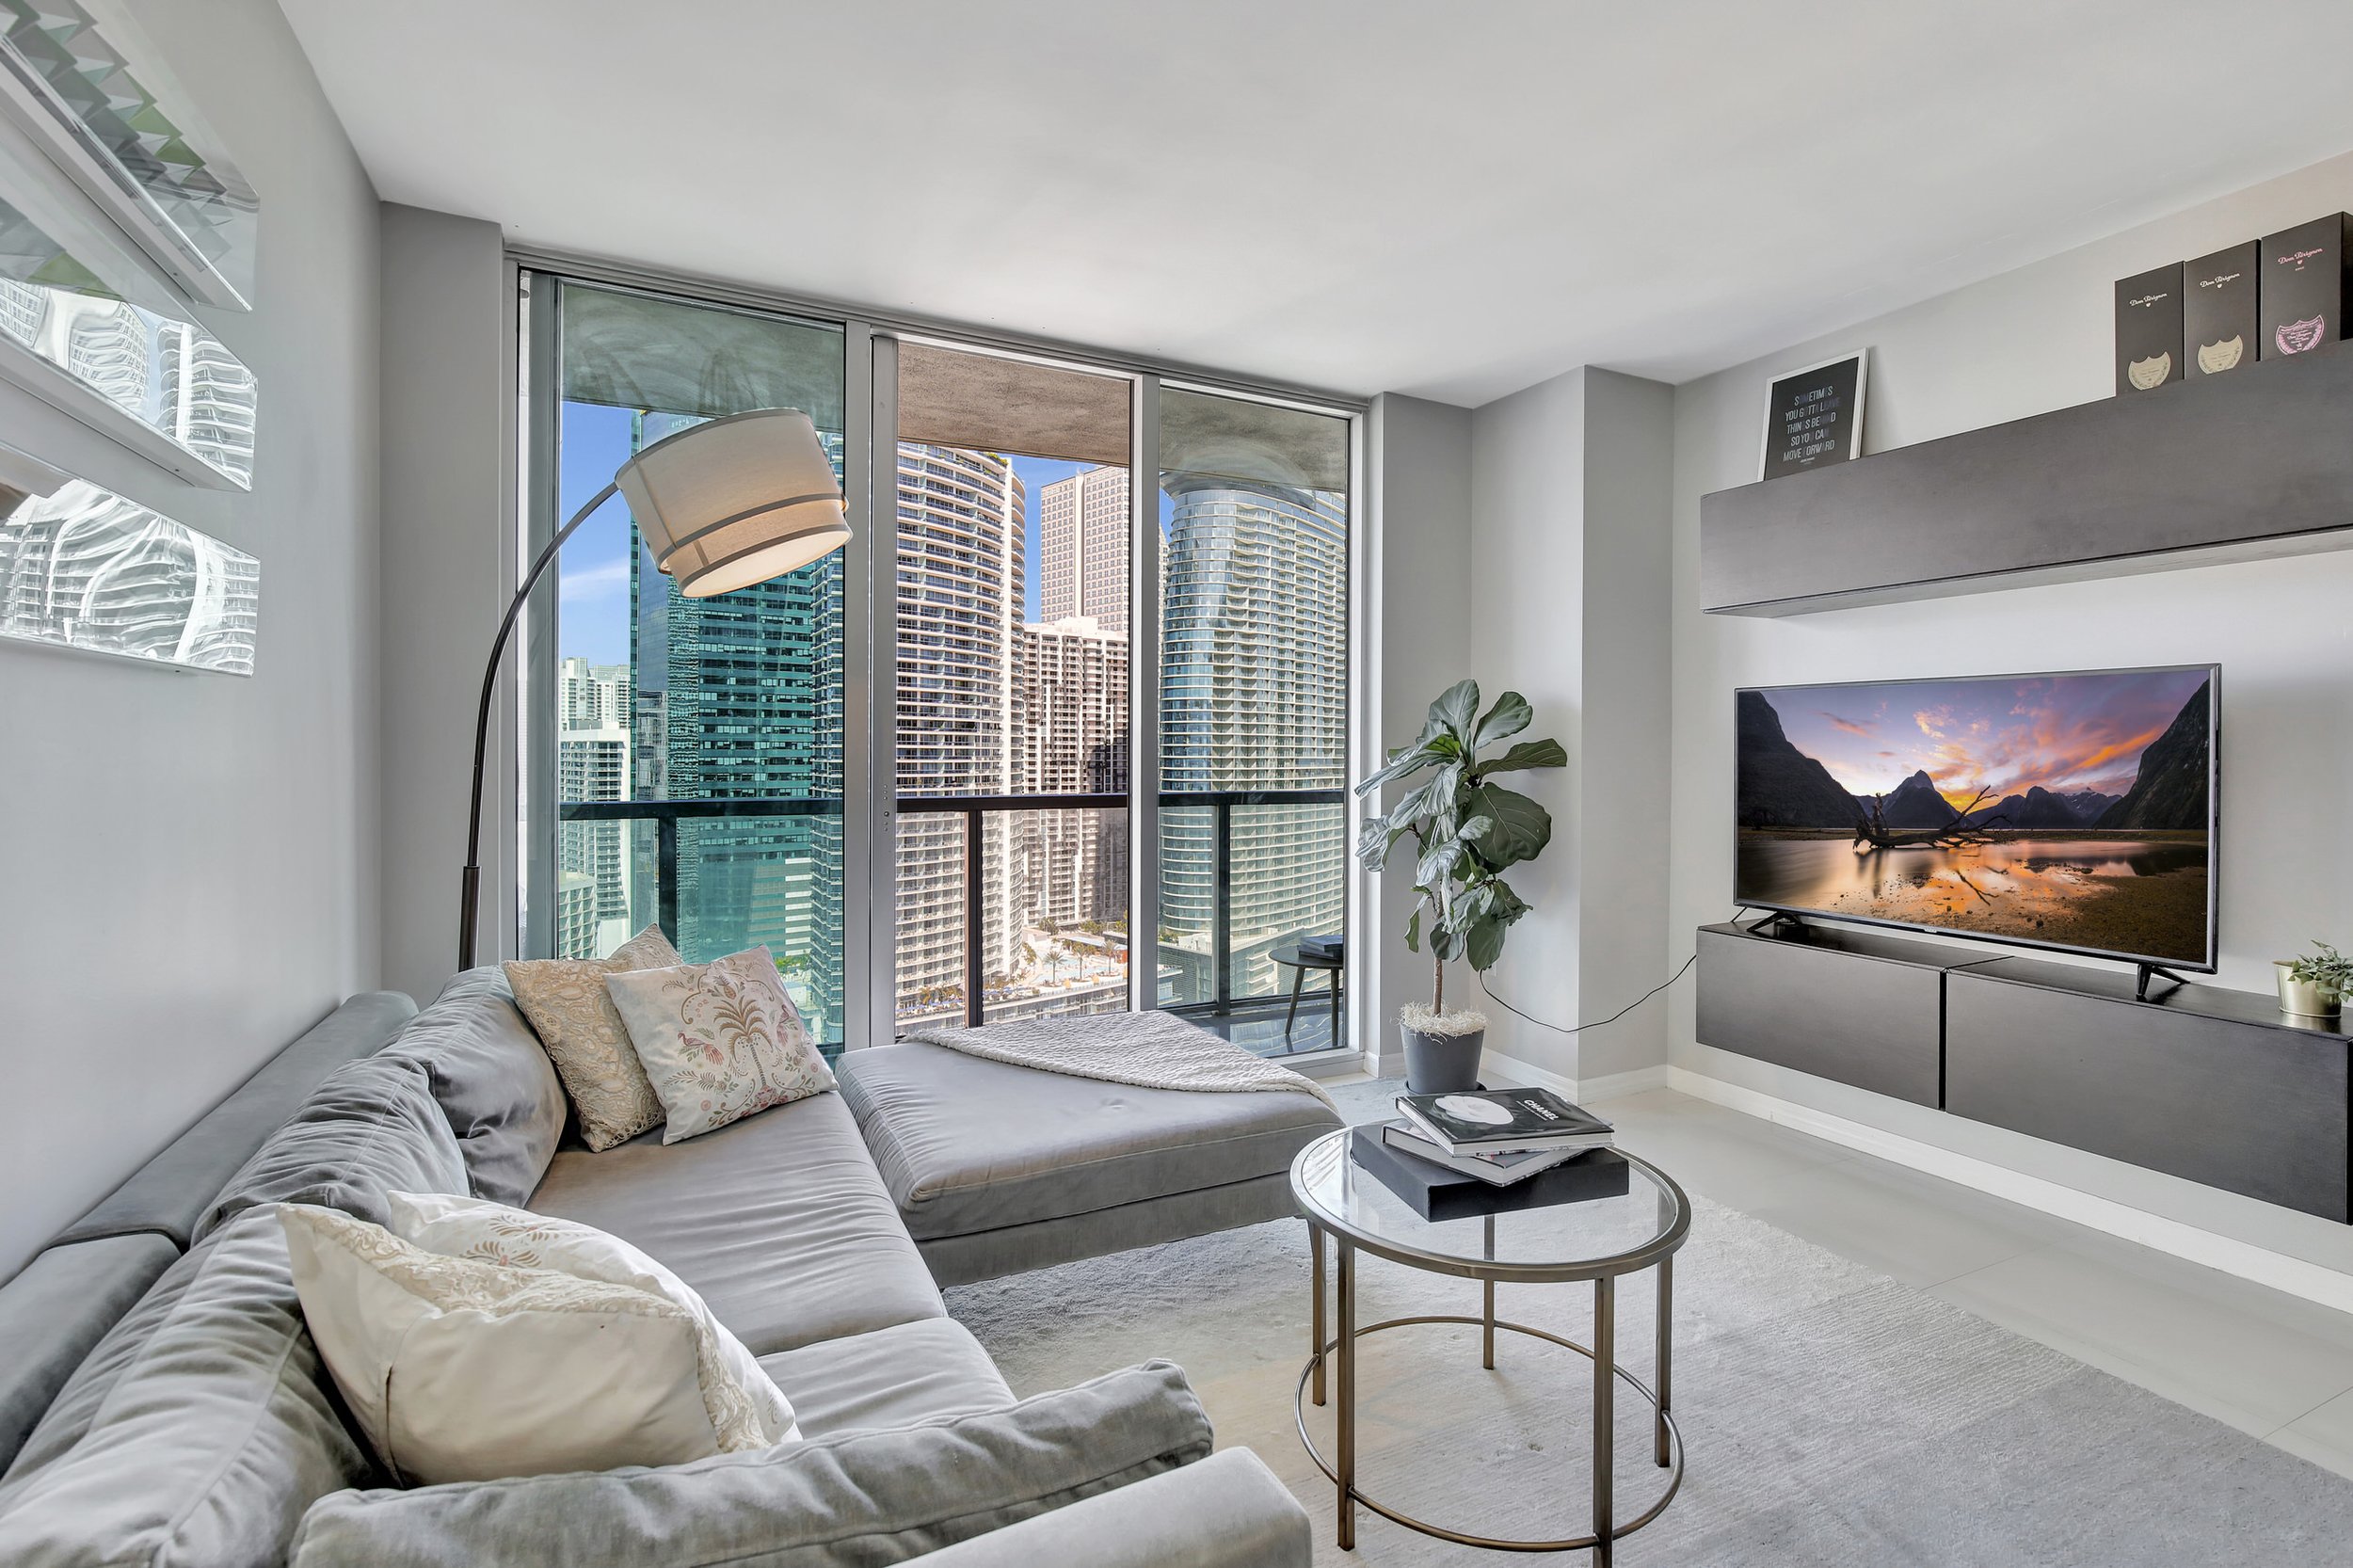 Check Out This Two-Bedroom Condo For Under $900K In Brickell 12.jpg